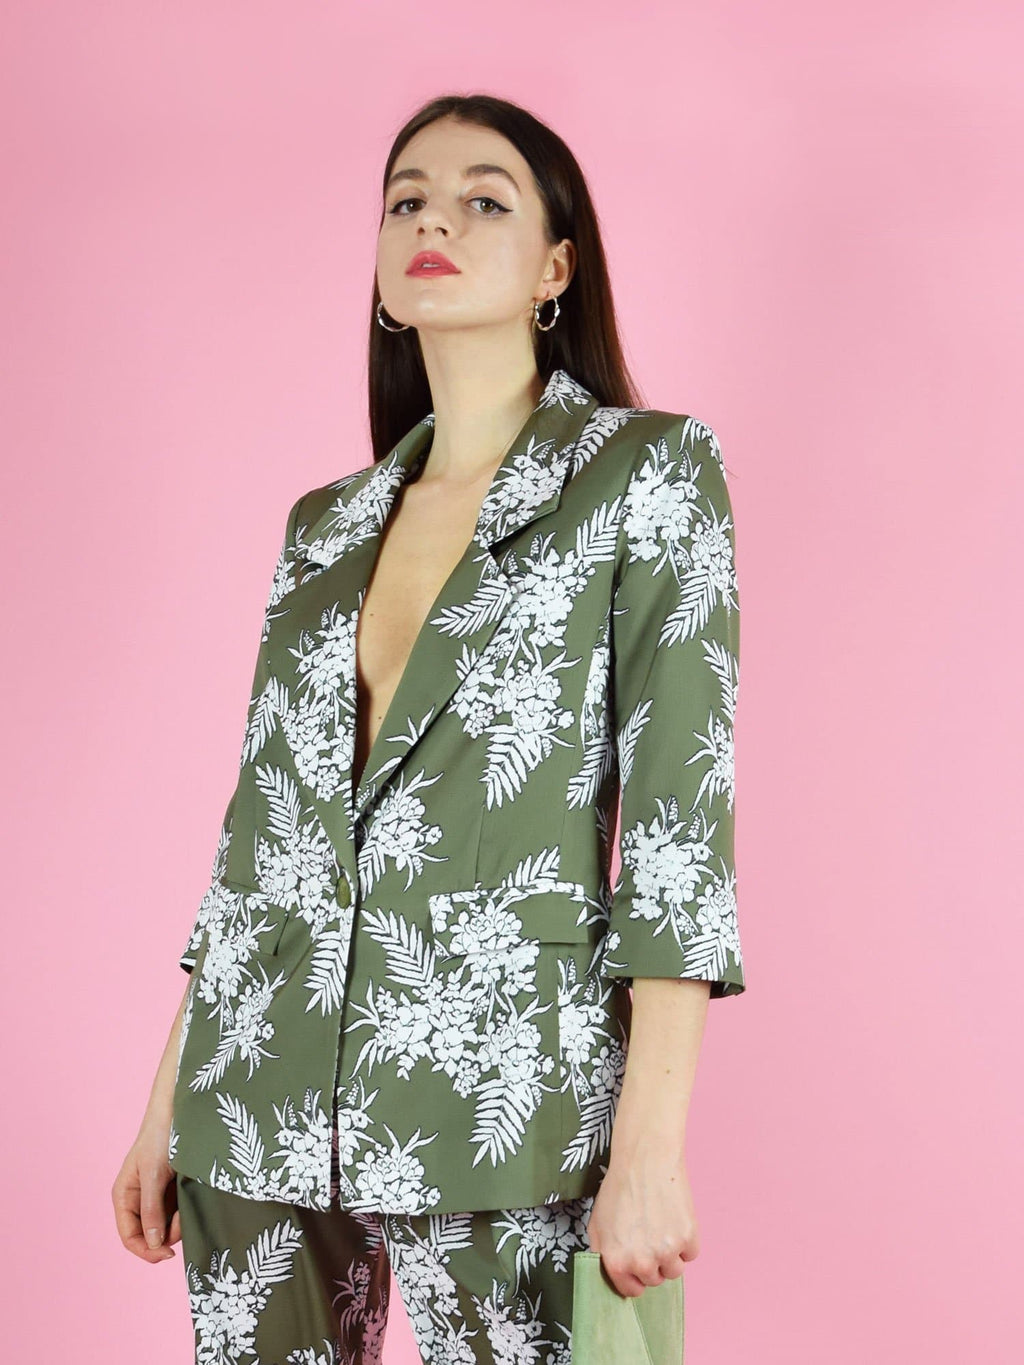 The girlboss sustainable longline blazer by blonde gone rogue. The blazer has a loose, oversized fit and two front pockets.